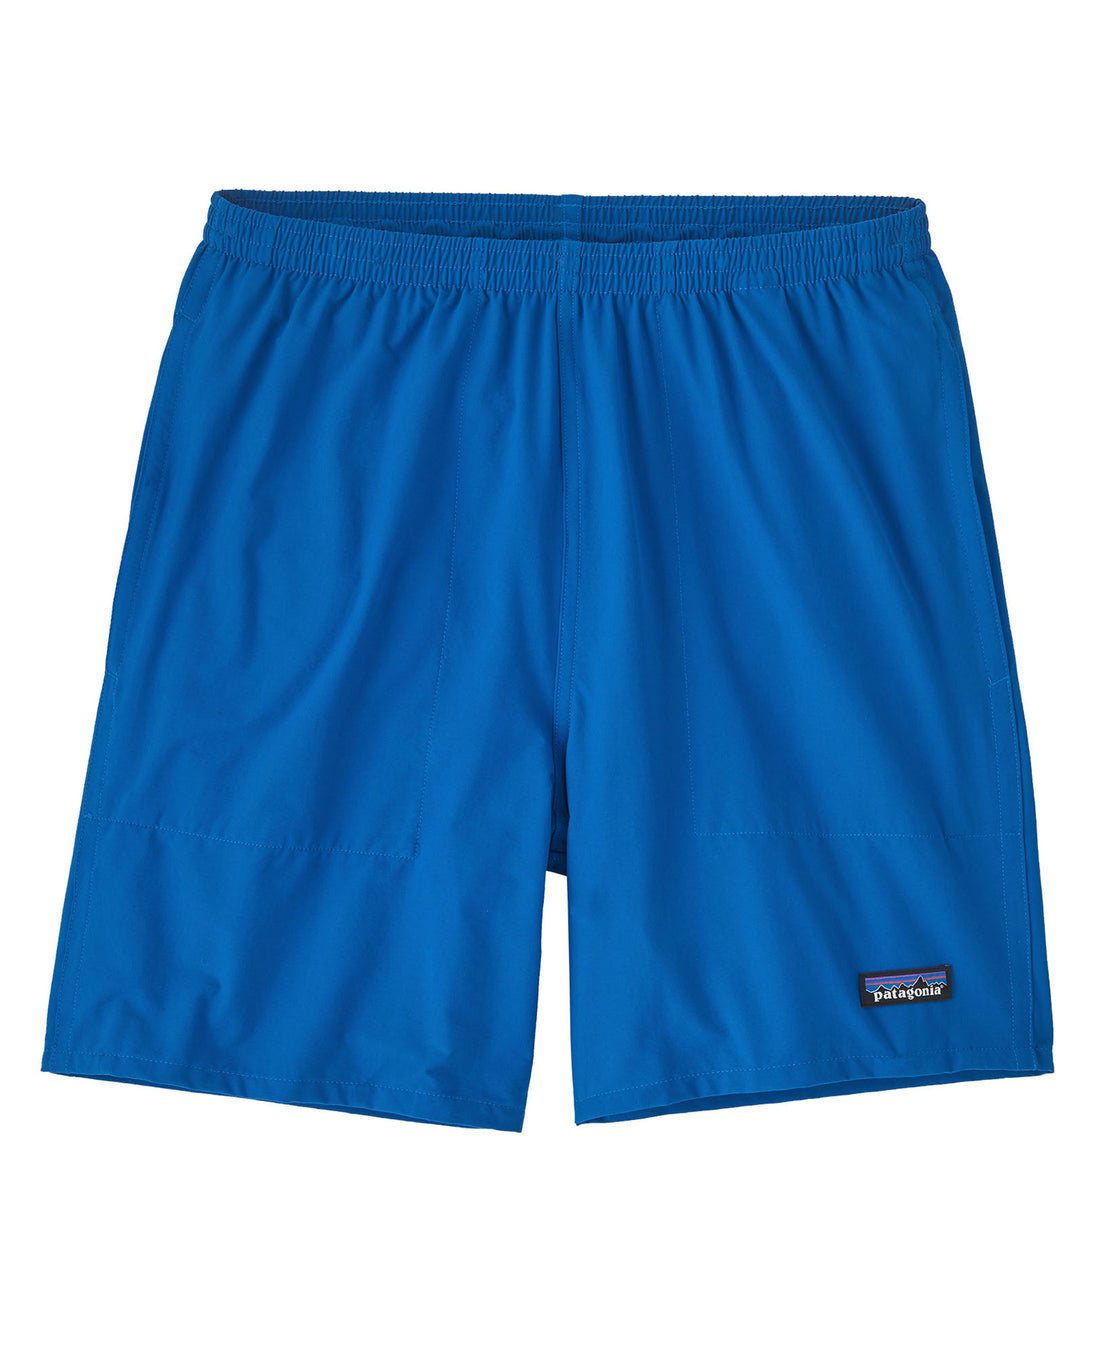 Baggies Lights 6.5in Shorts - Endless Blue